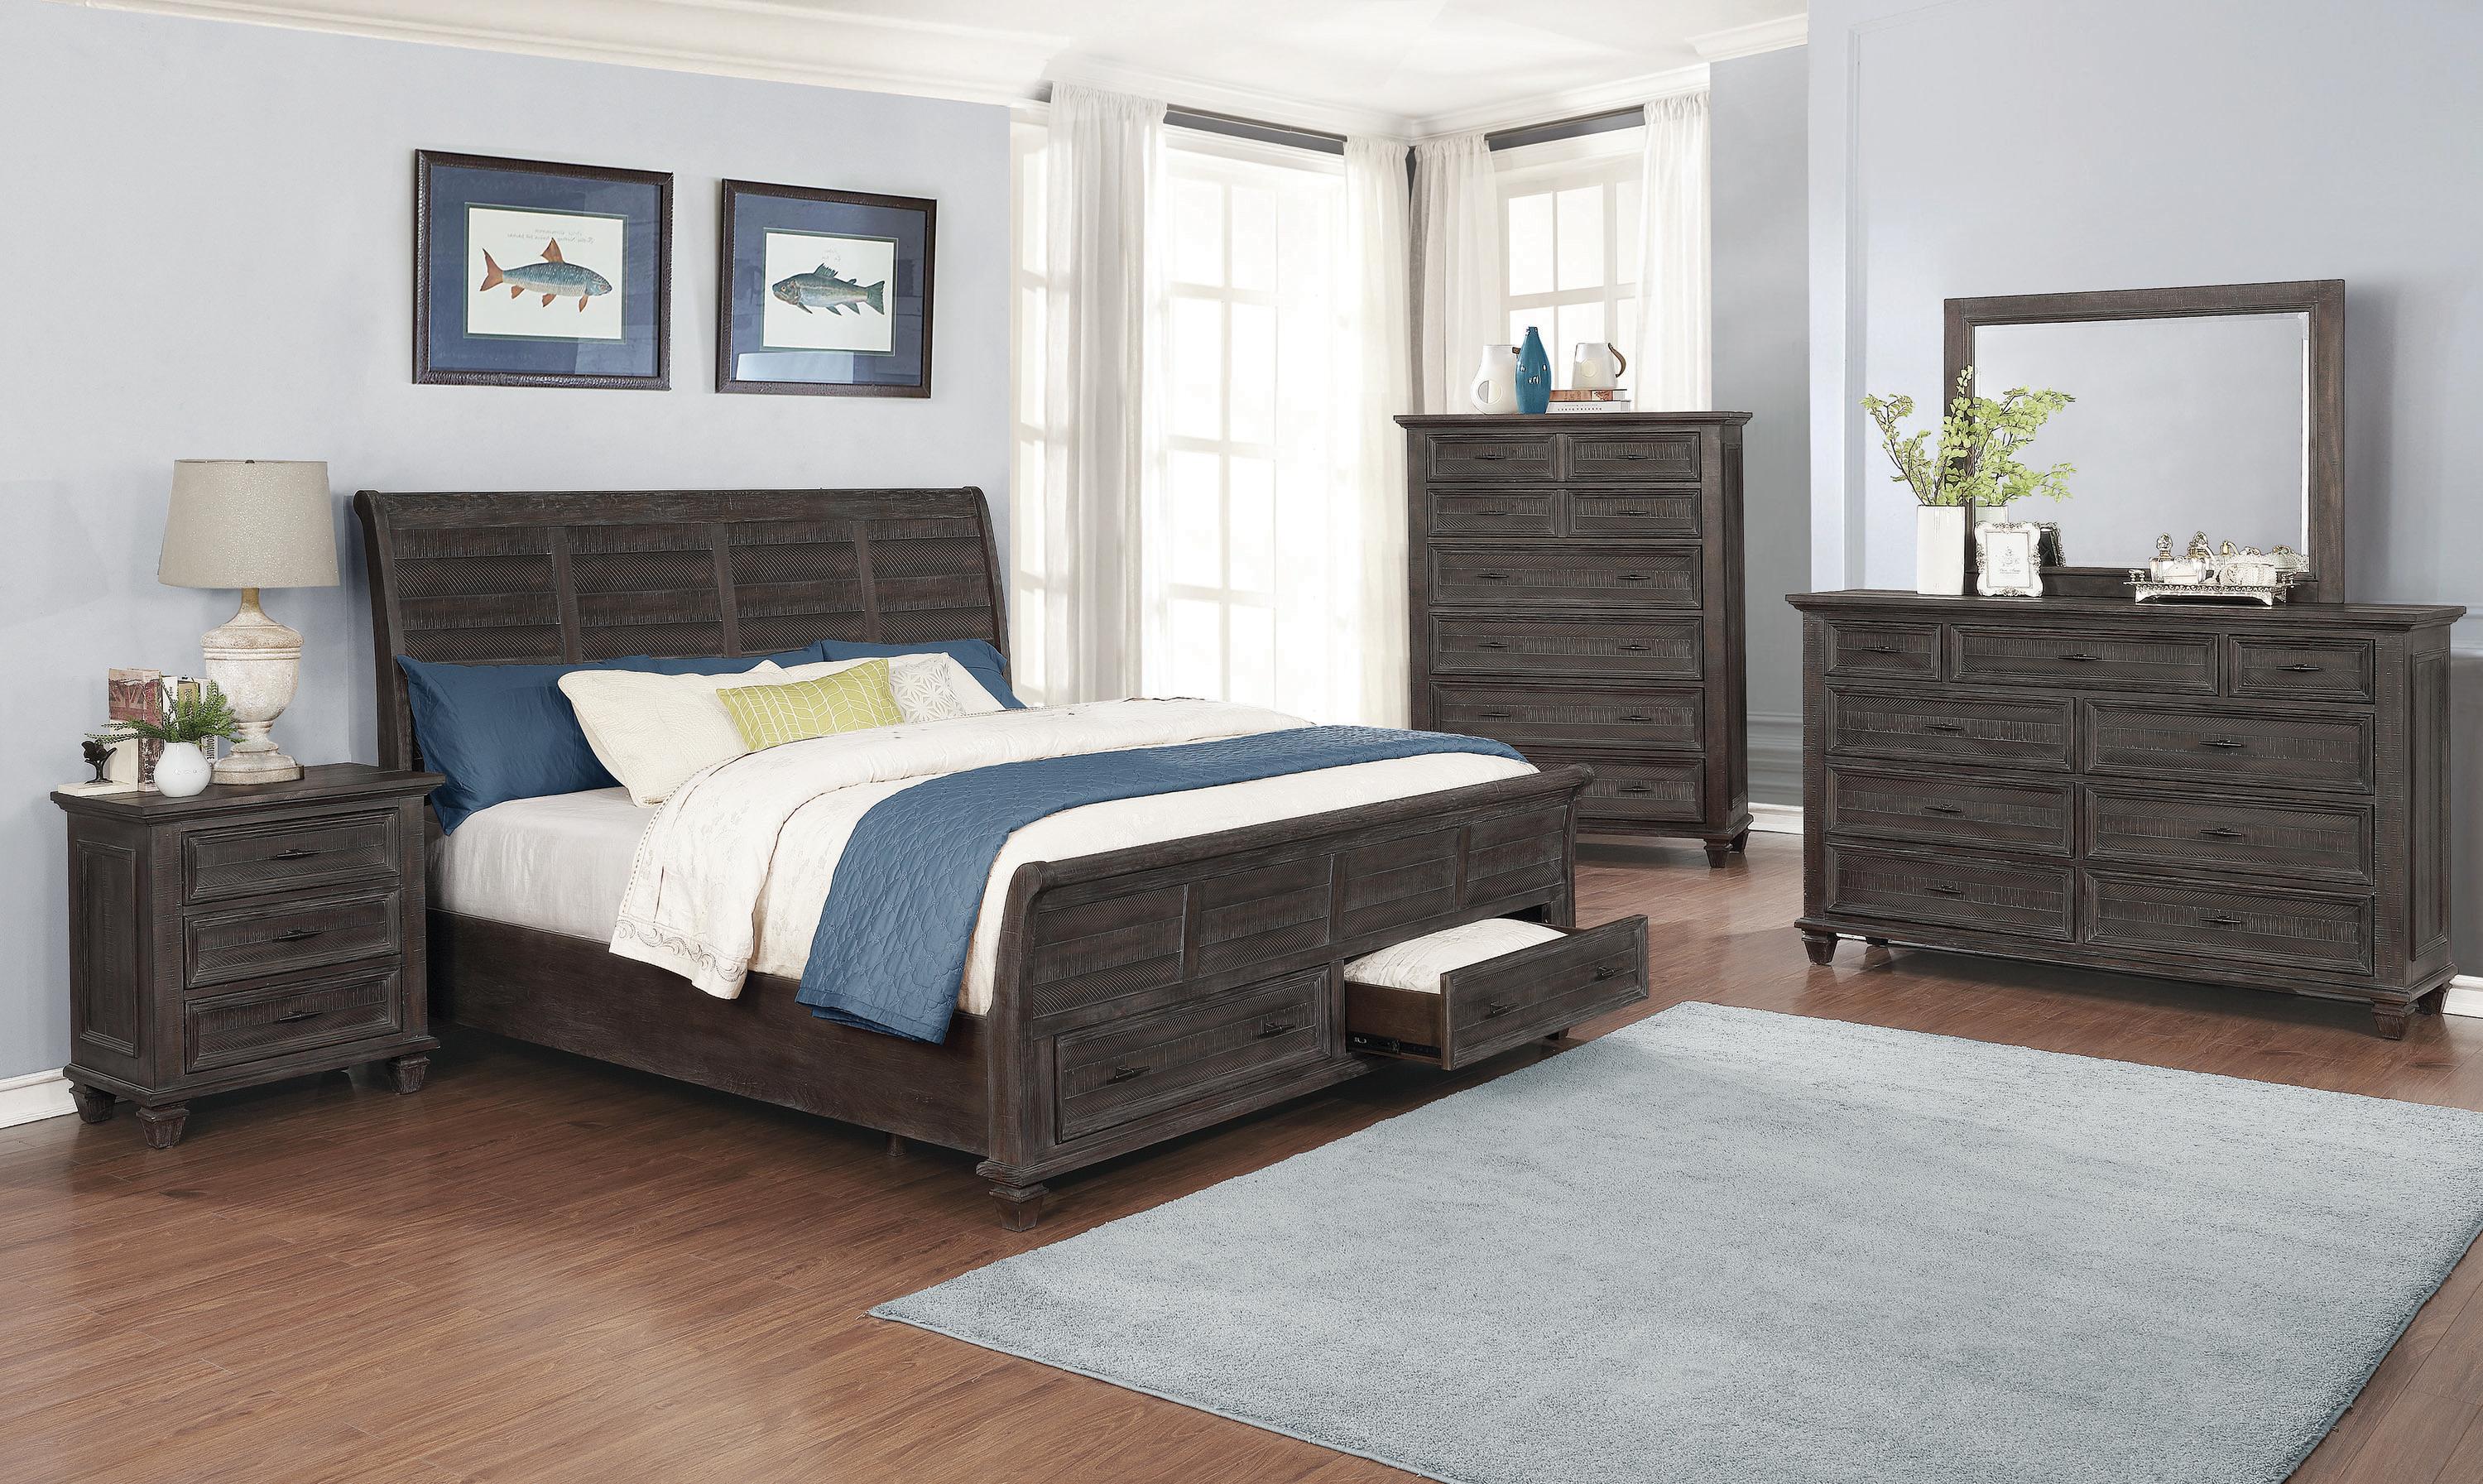 Transitional Bedroom Set 222880Q-6PC Atascadero 222880Q-6PC in Brown 